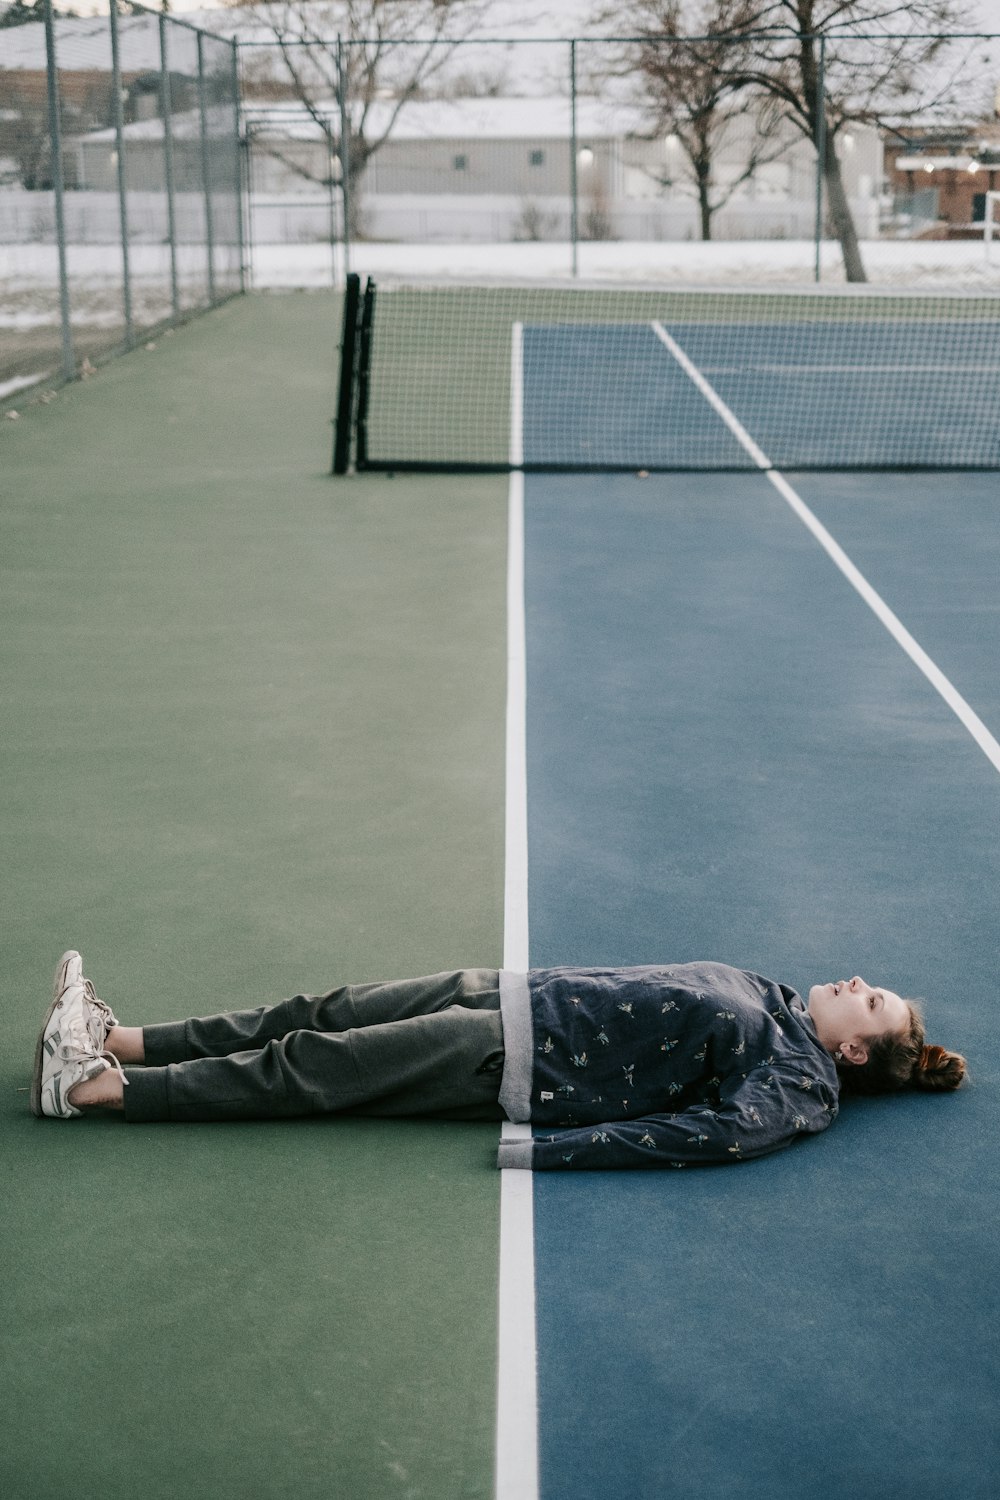 a person laying on the ground on a tennis court